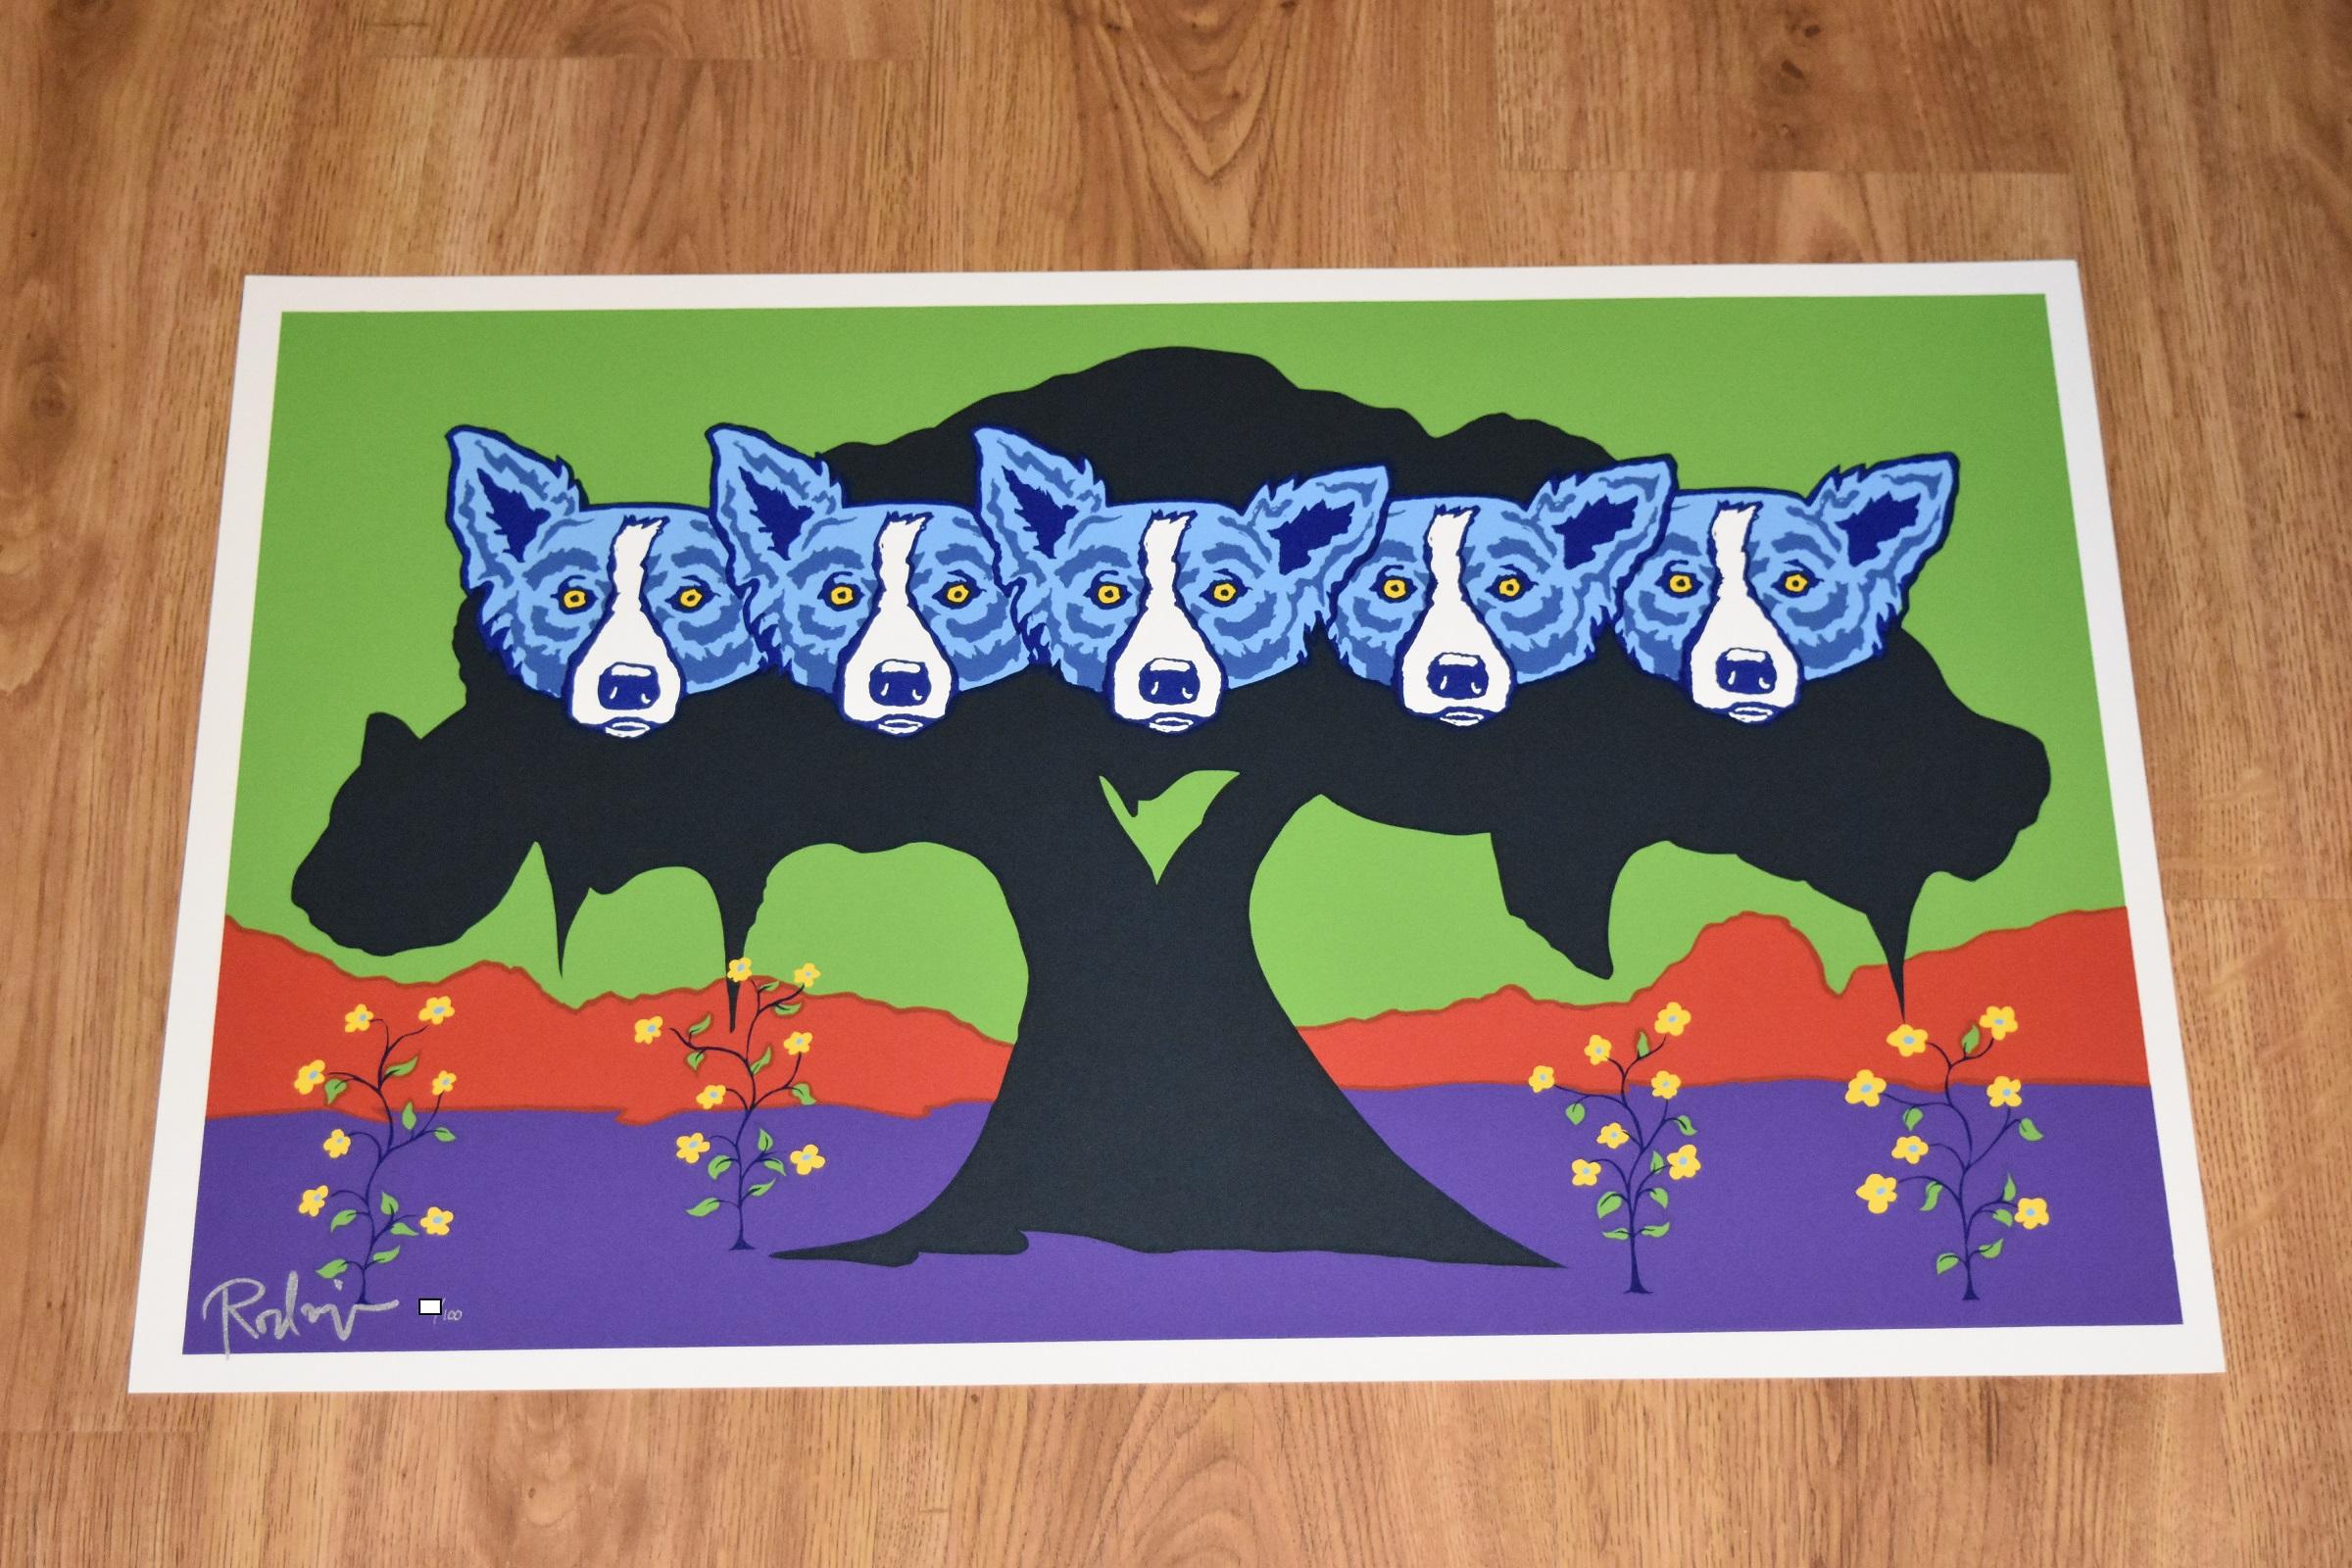 george rodrigue signed prints for sale